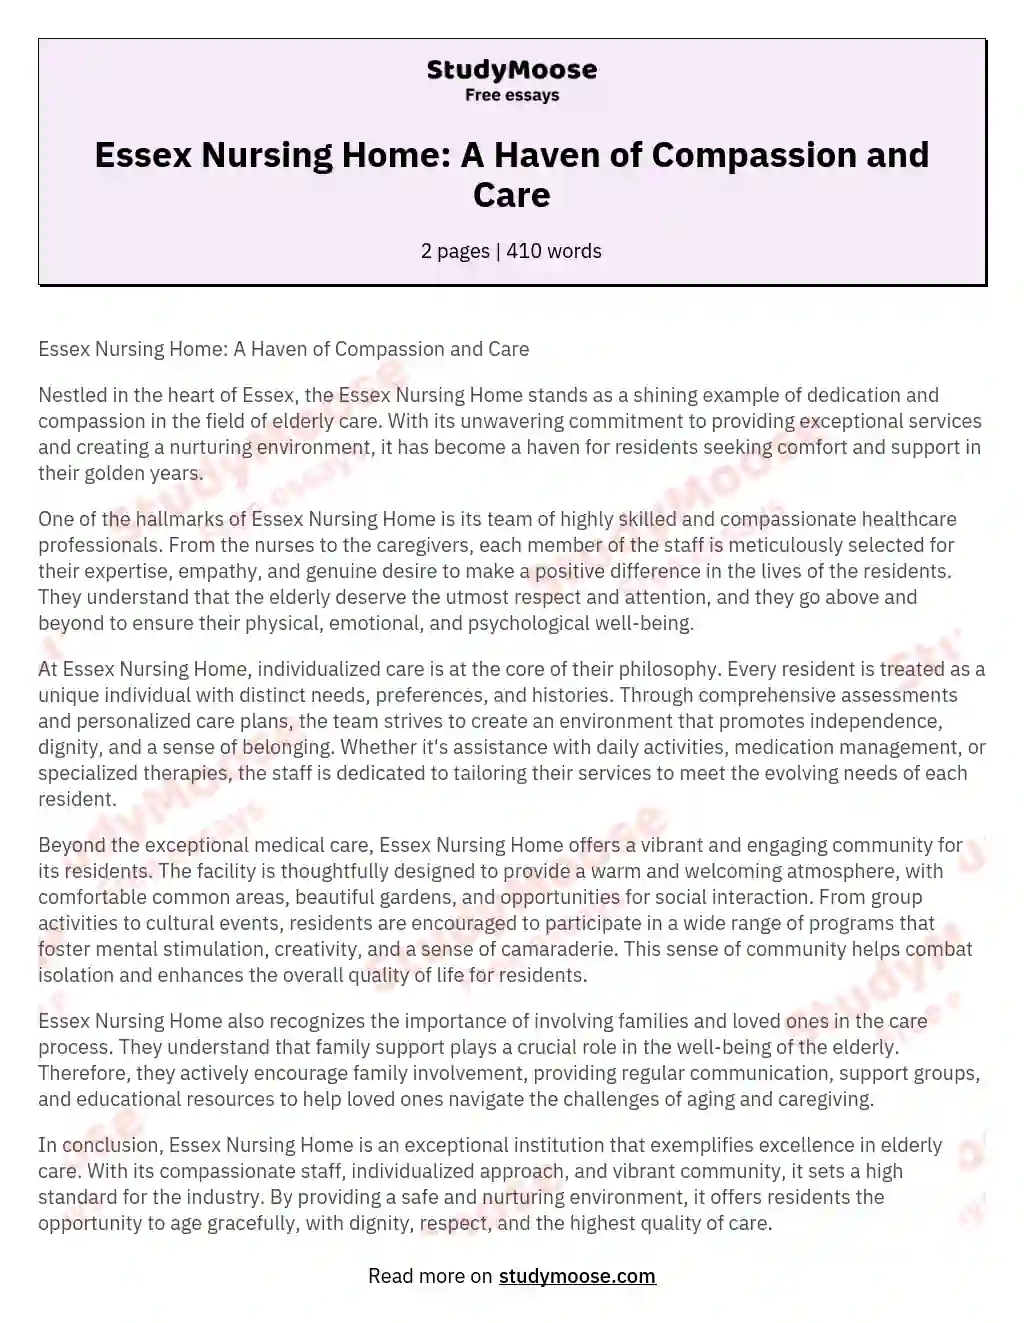 Essex Nursing Home: A Haven of Compassion and Care essay